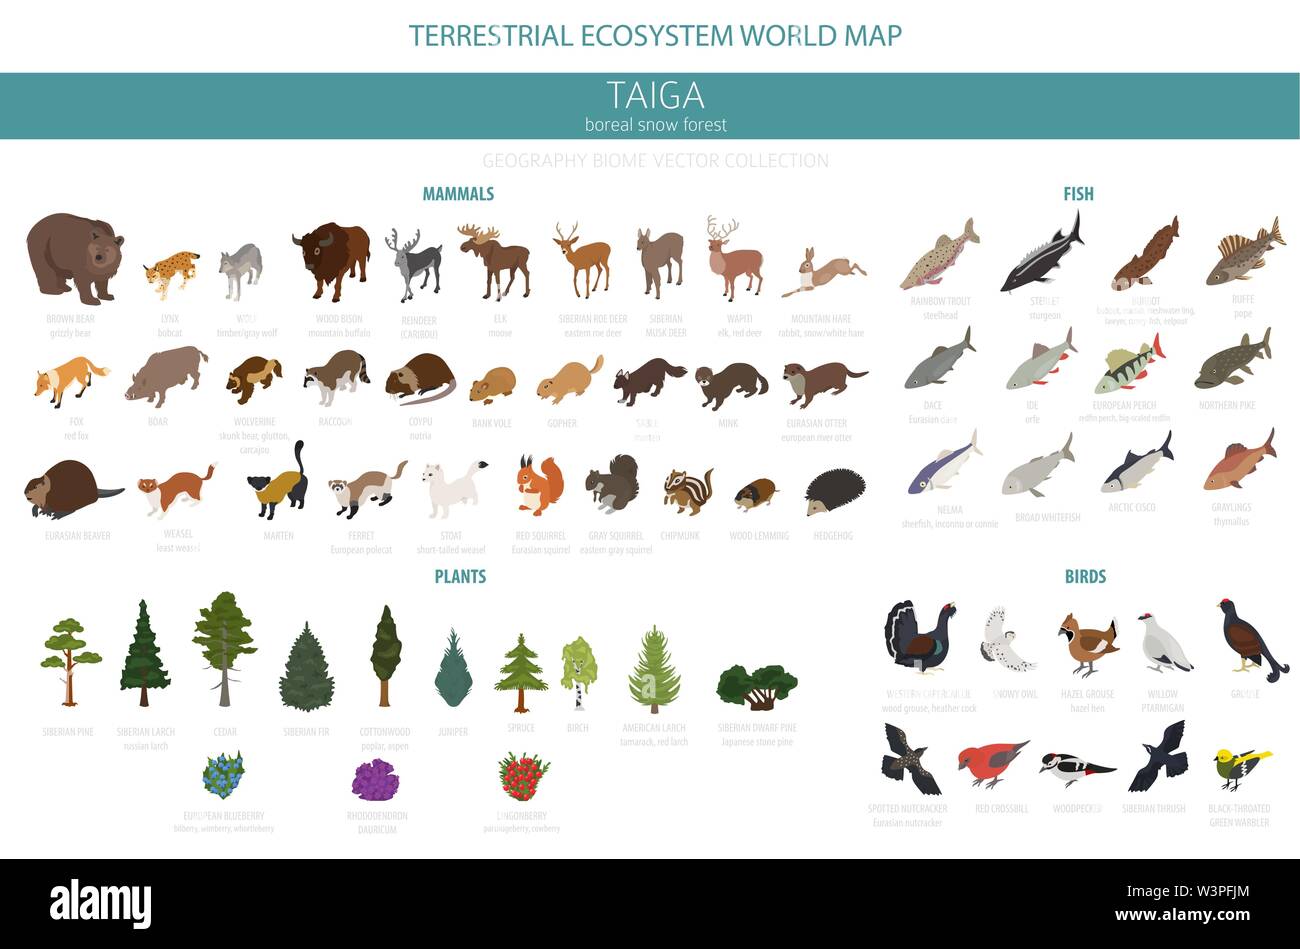 Taiga biome, boreal snow forest 3d isometry design. Terrestrial ecosystem world map. Animals, birds, fish and plants infographic elements. Vector illu Stock Vector